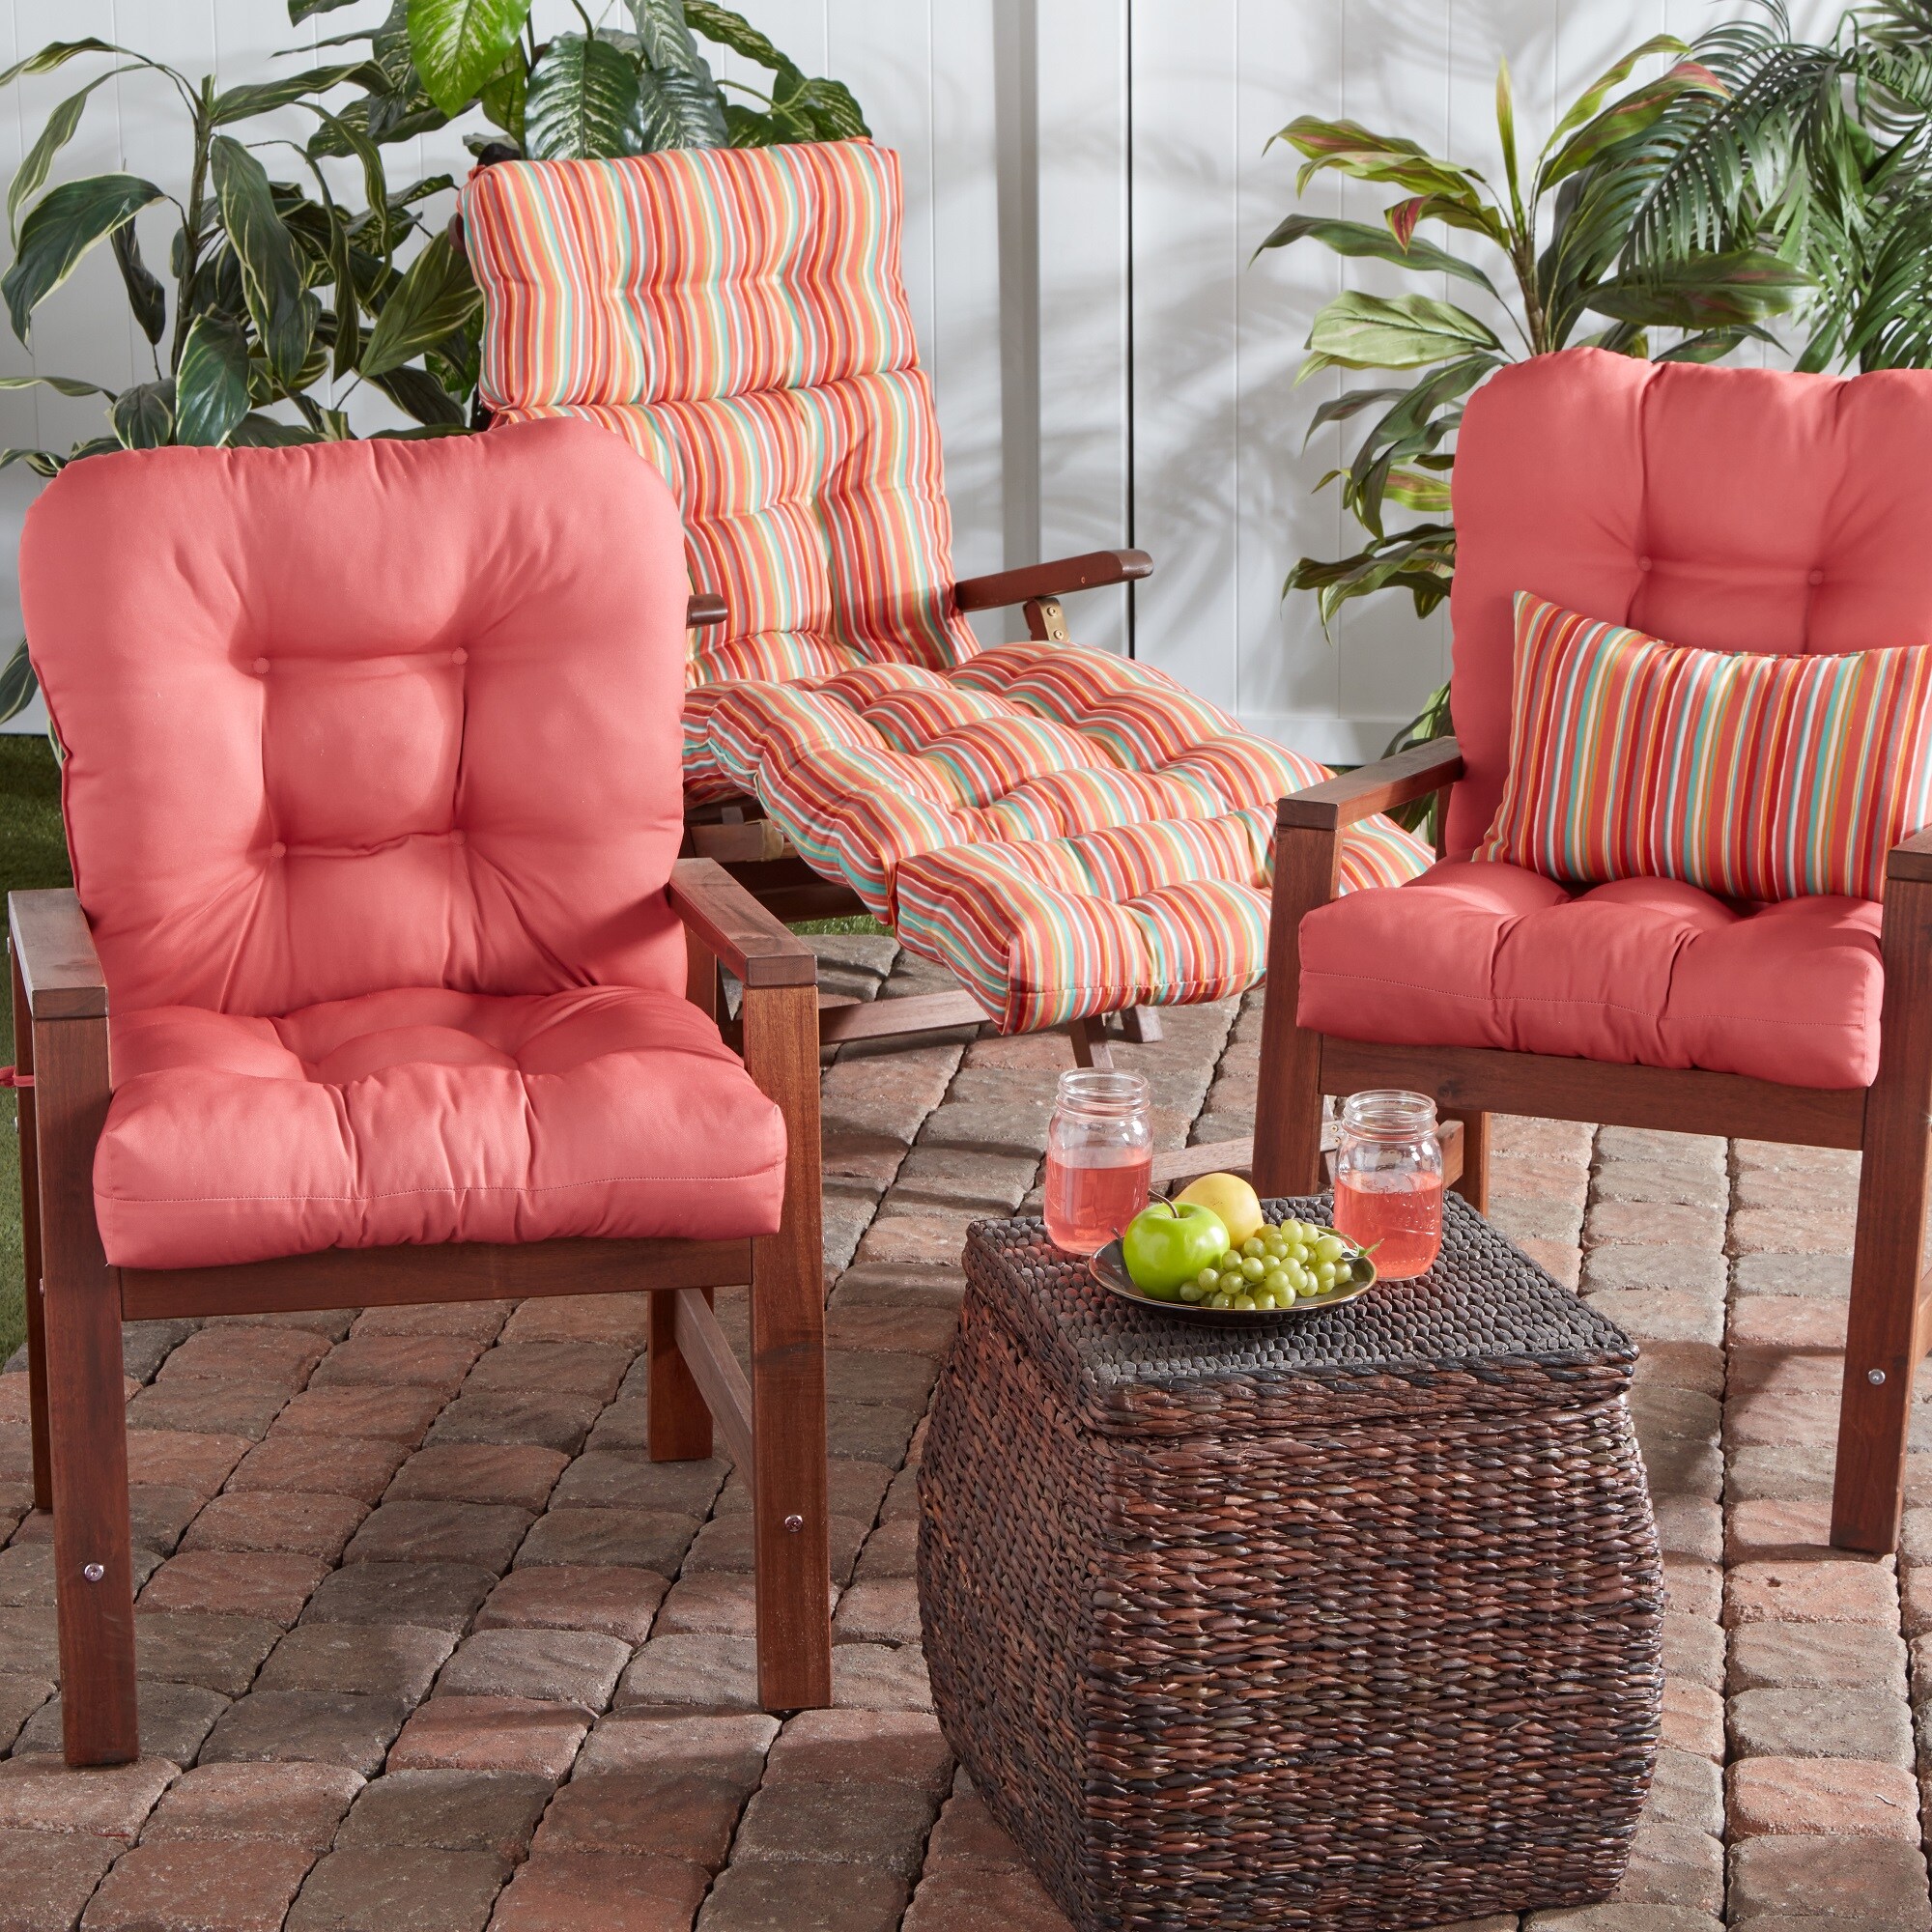 Greendale Home Fashions This Greendale Home Fashions Outdoor Seat 